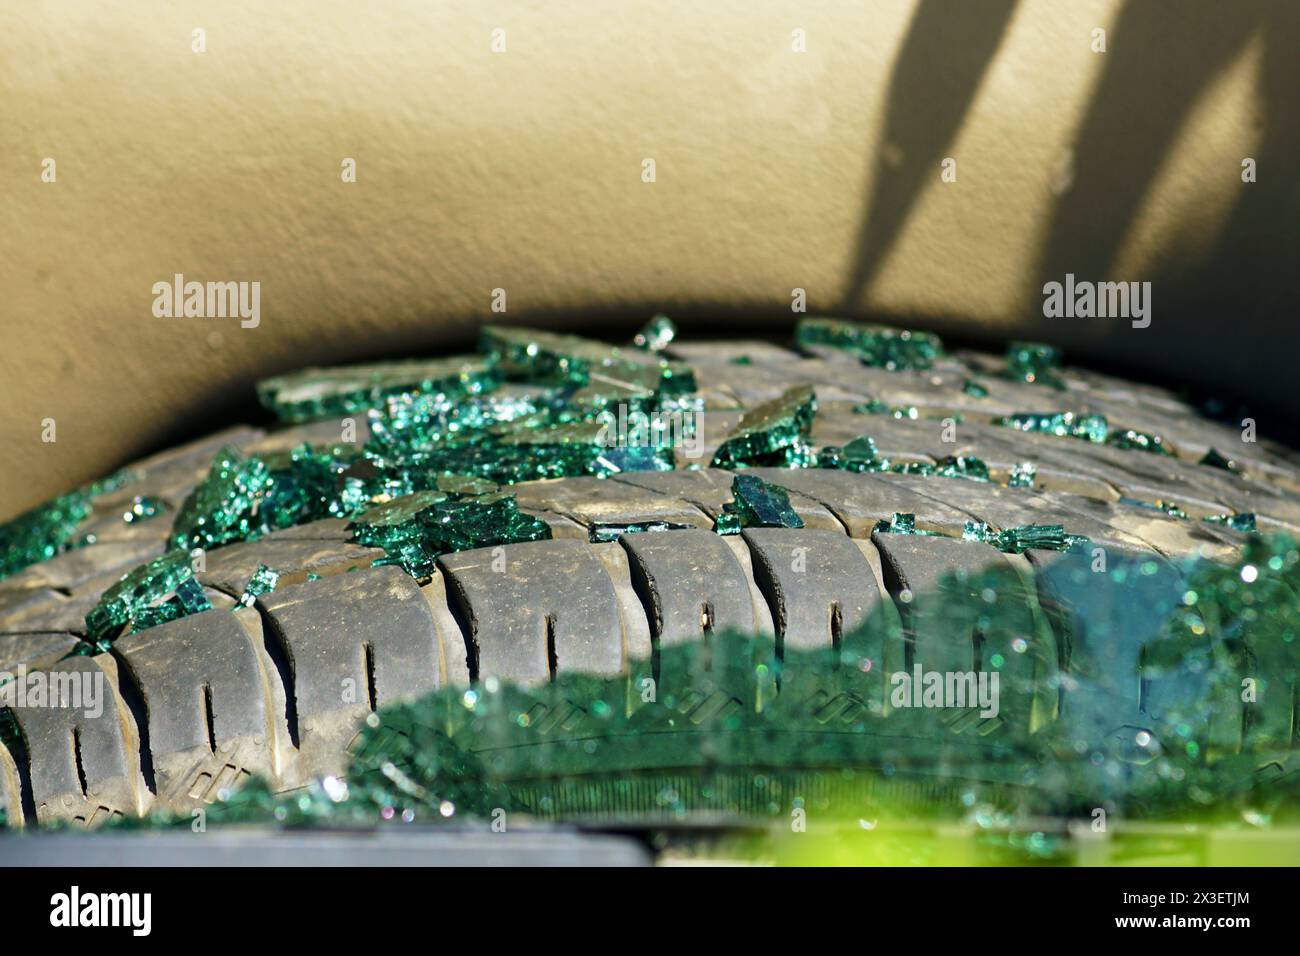 Pieces of a broken rear window of a car lying on a spare tire. Stock Photo